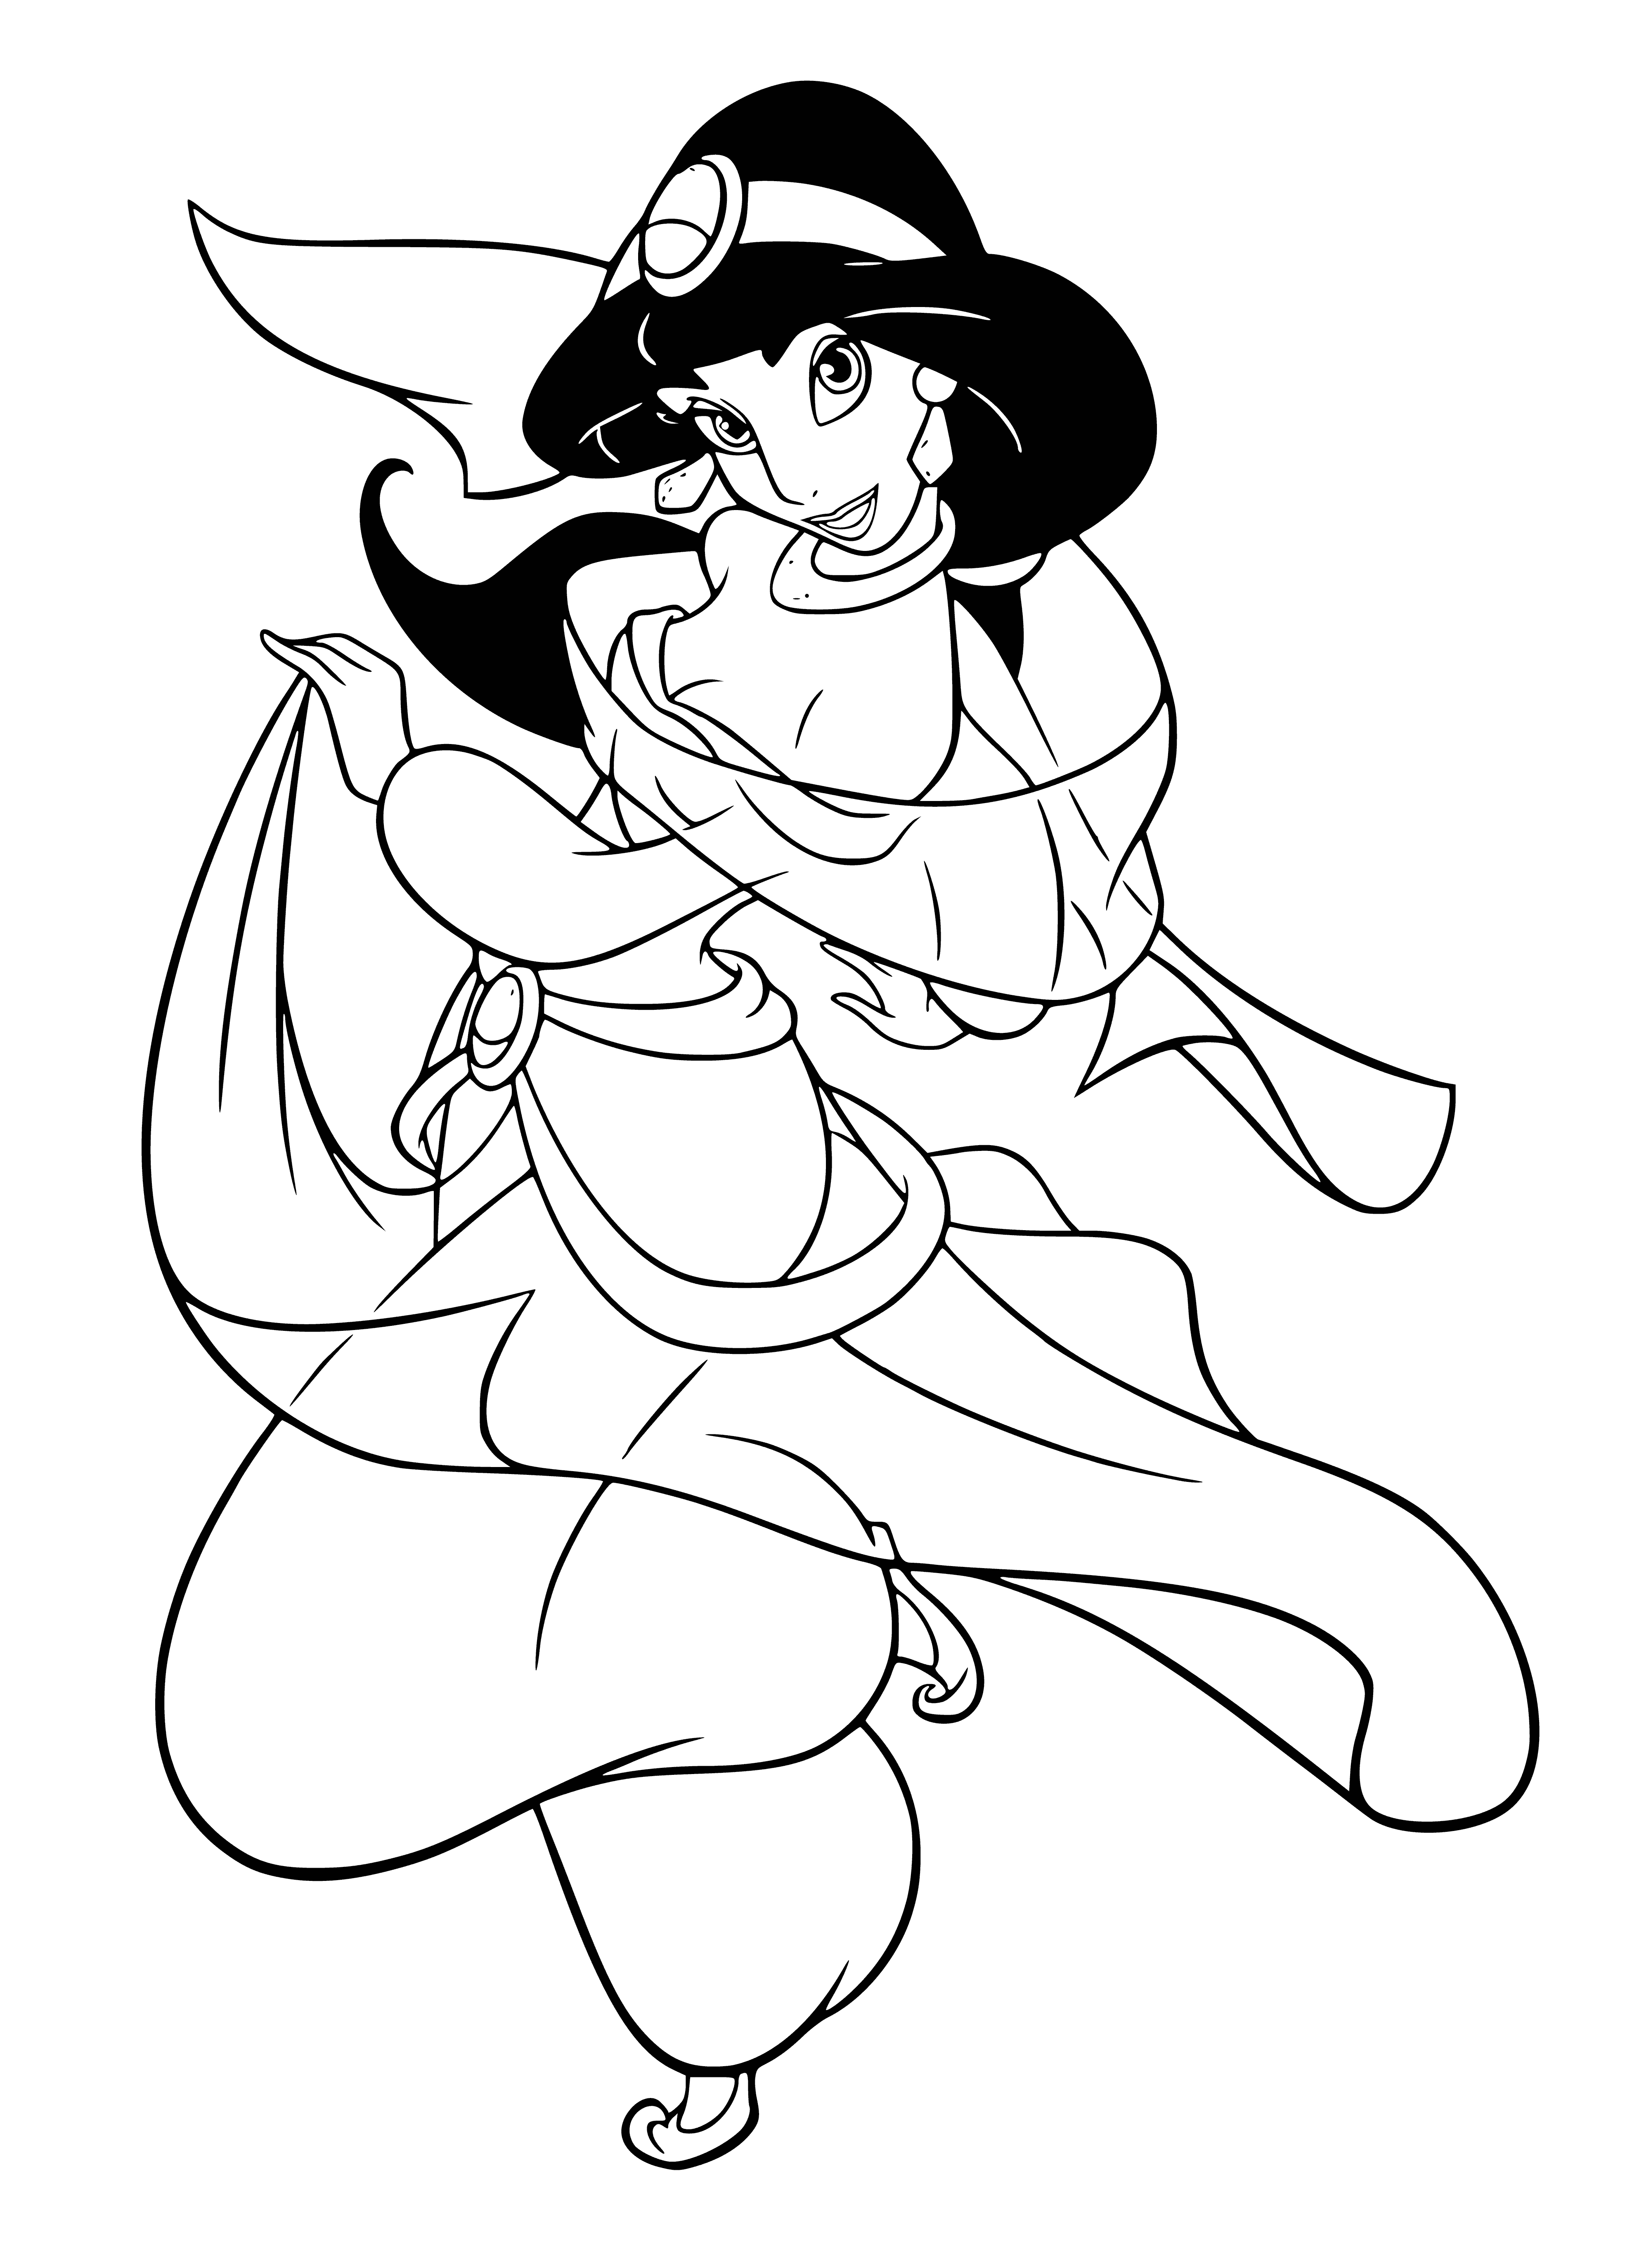 Dance jasmine coloring page